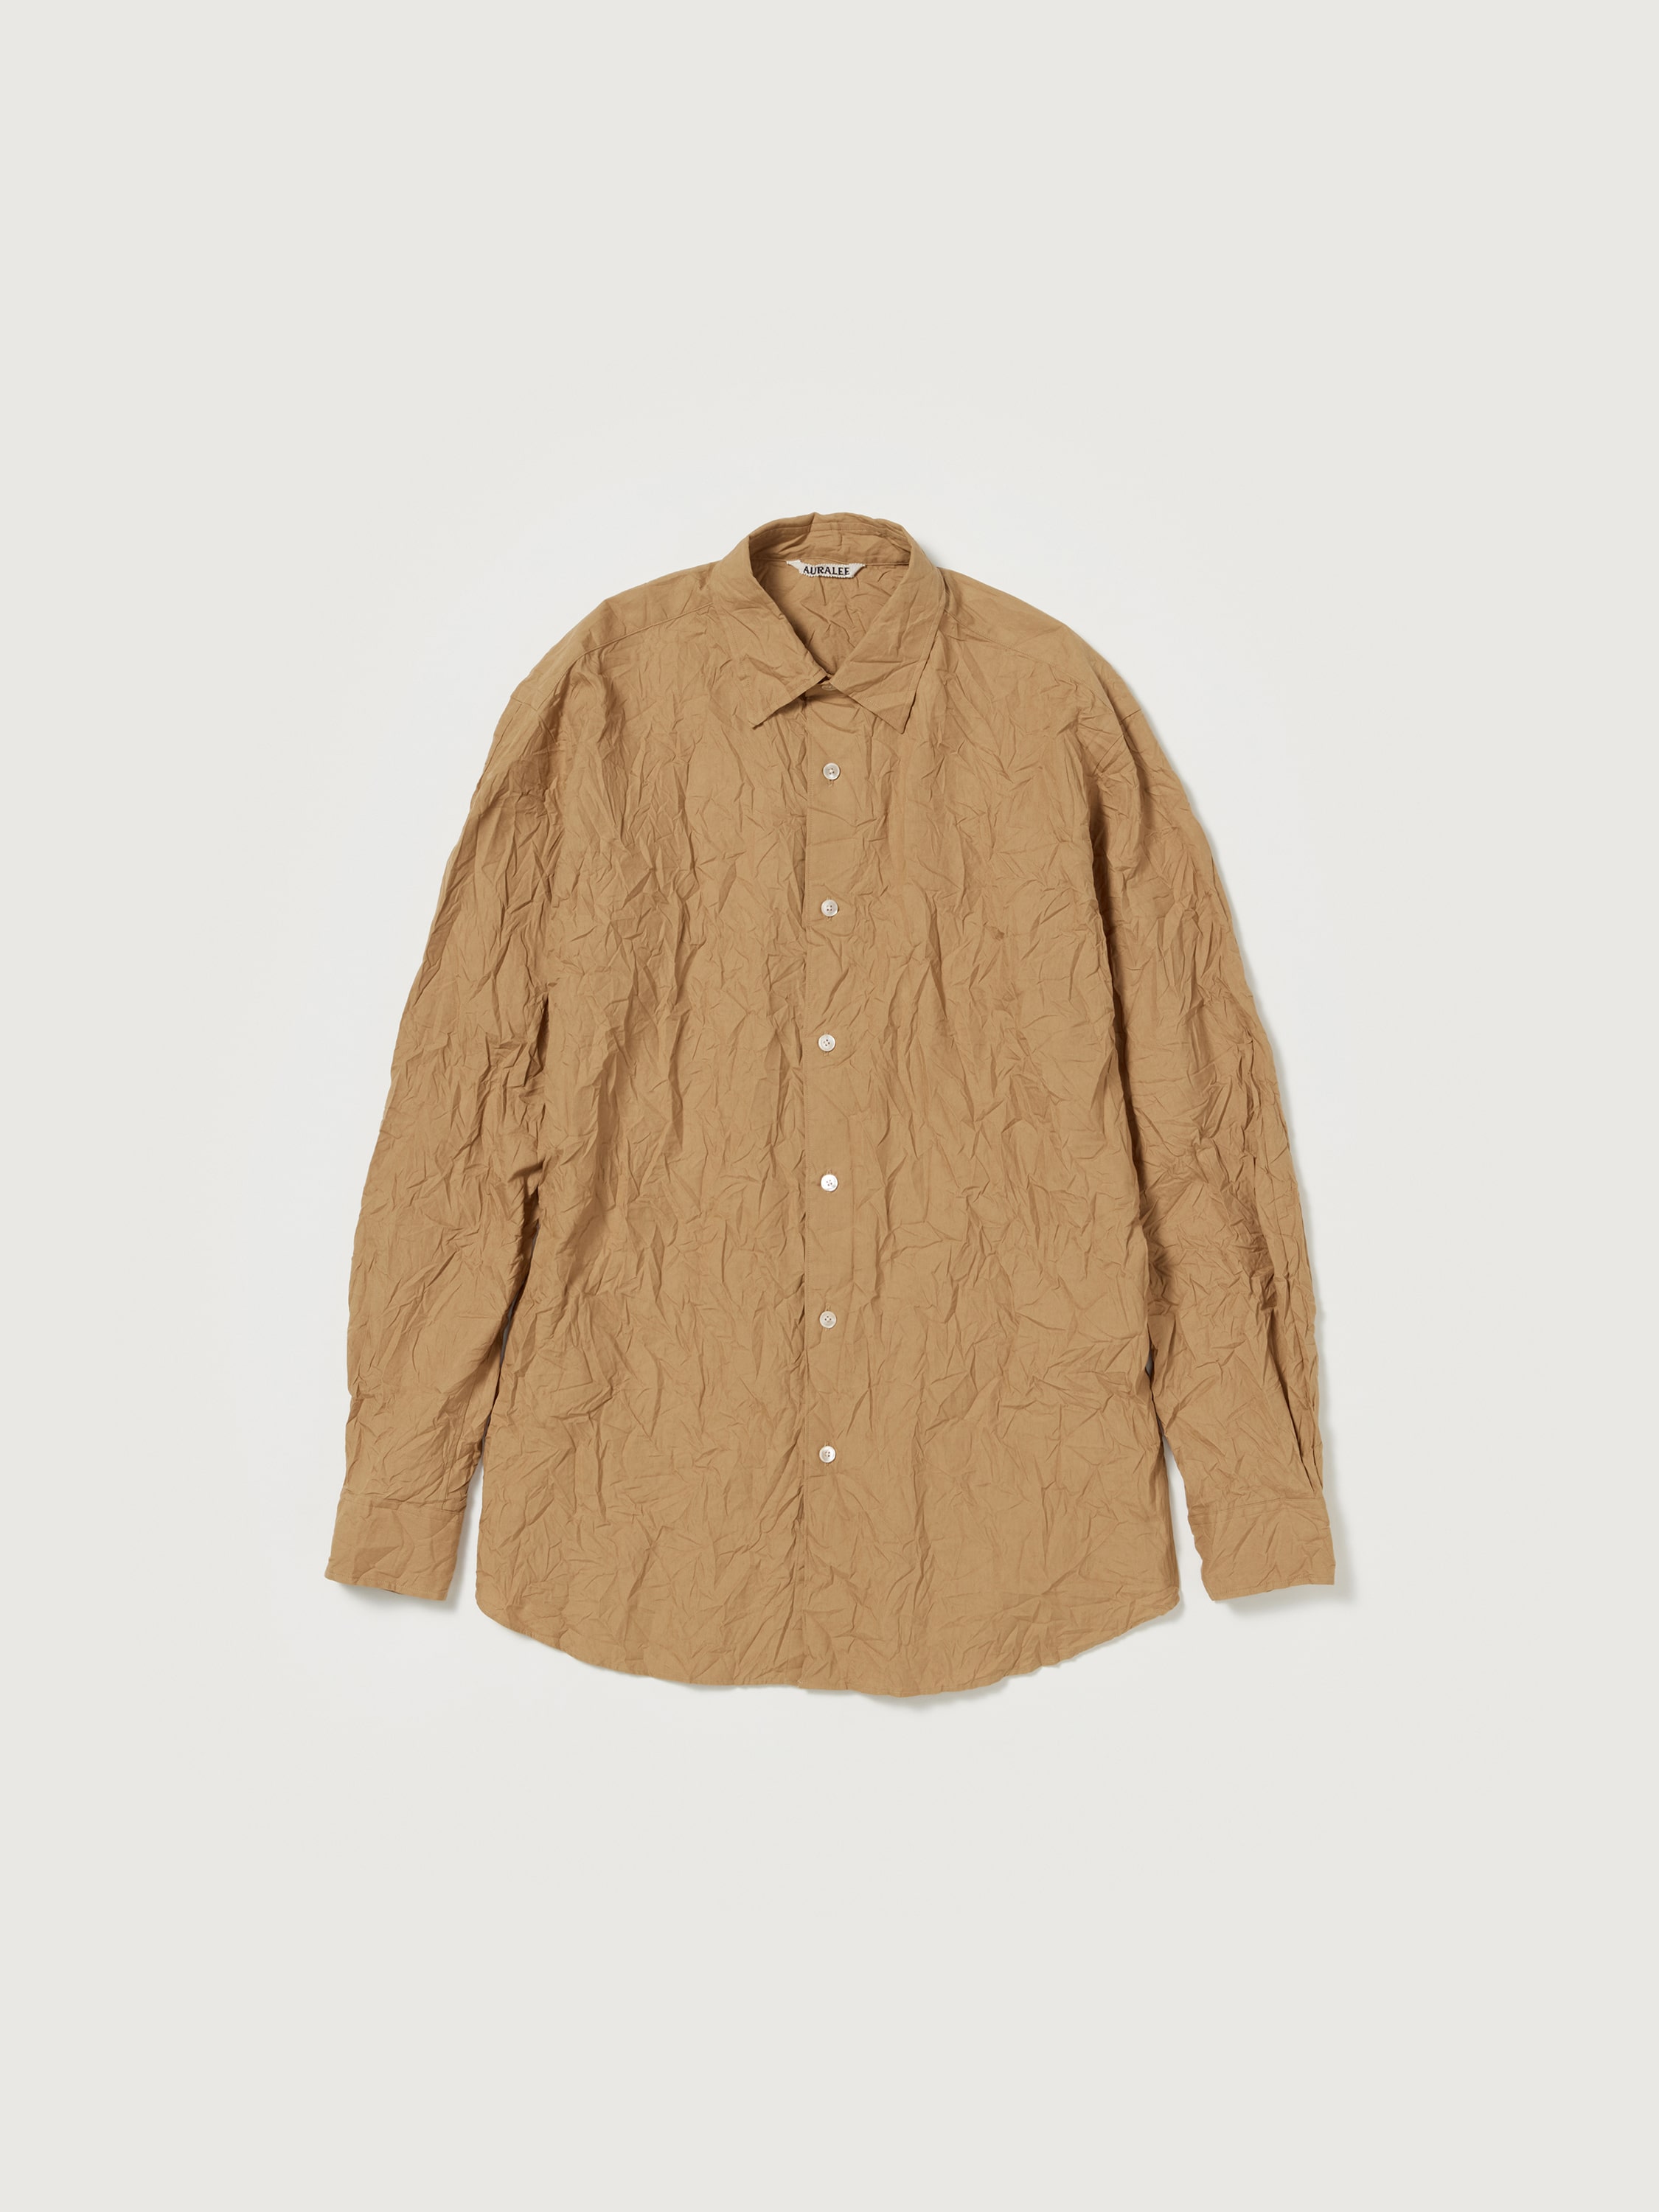 WRINKLED WASHED FINX TWILL SHIRT 詳細画像 BROWN 1